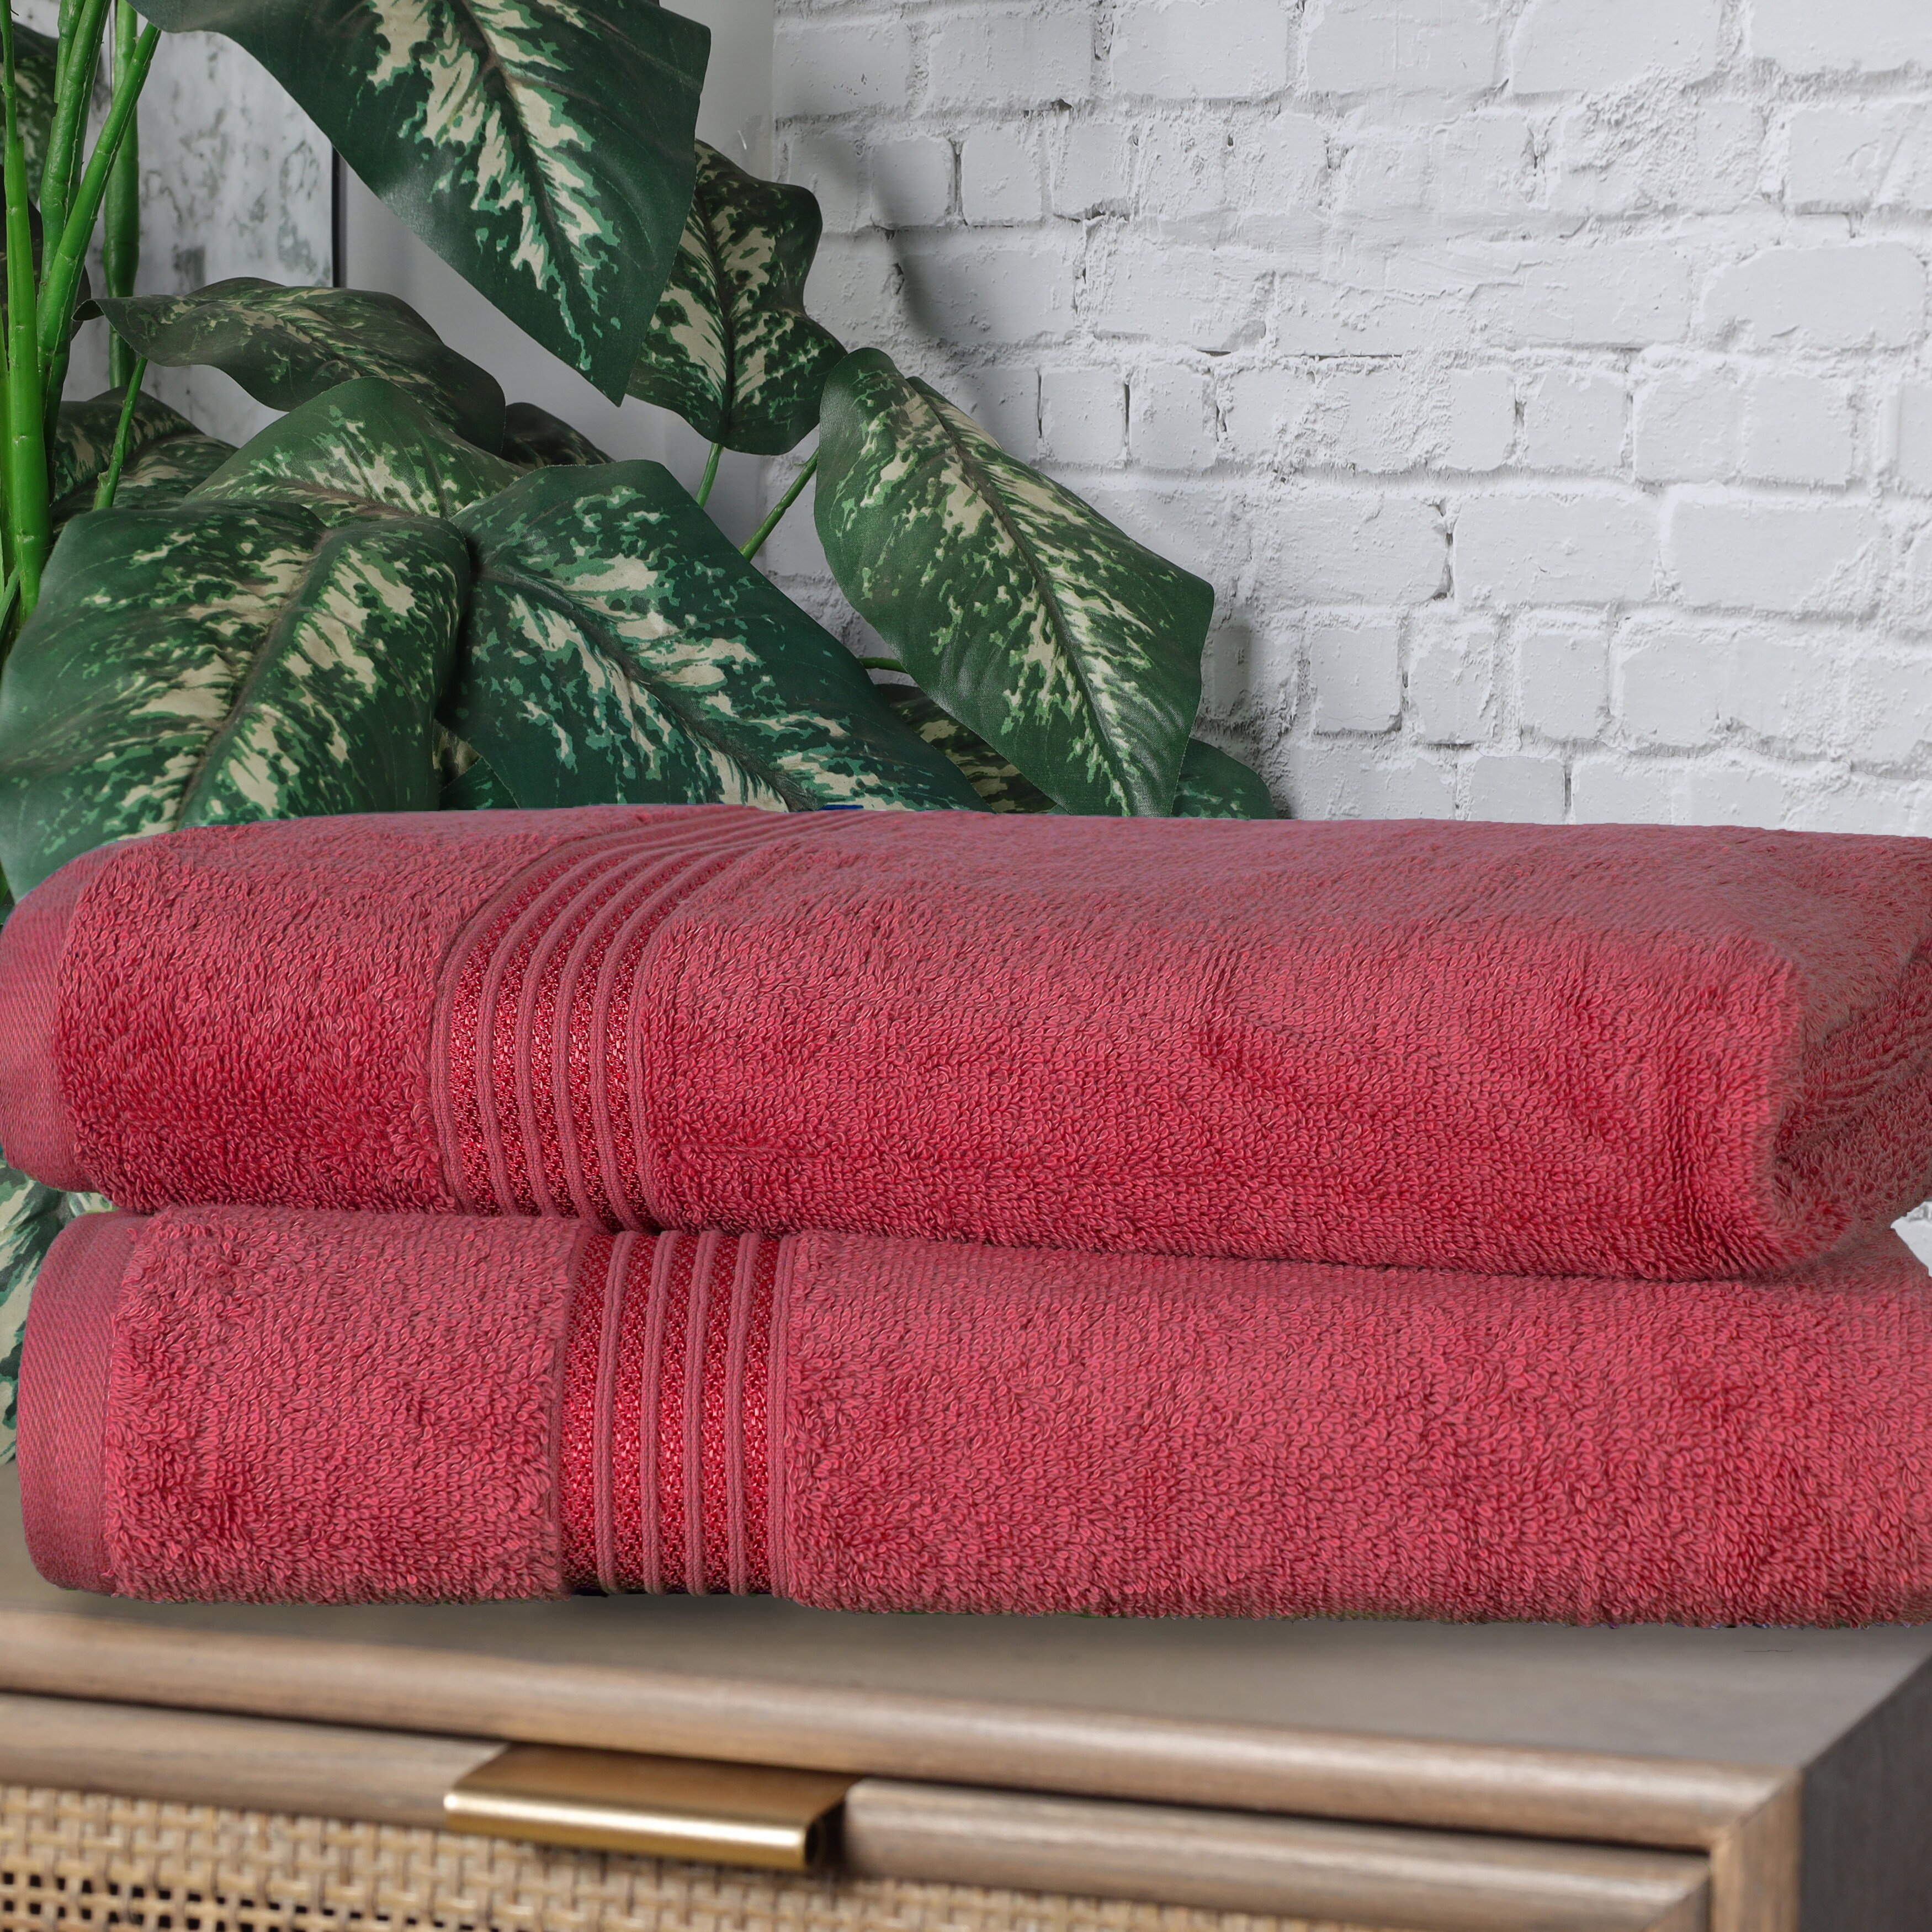 Superior Egyptian Cotton Heavyweight Solid Plush Towel Set - On Sale - Bed  Bath & Beyond - 5296998